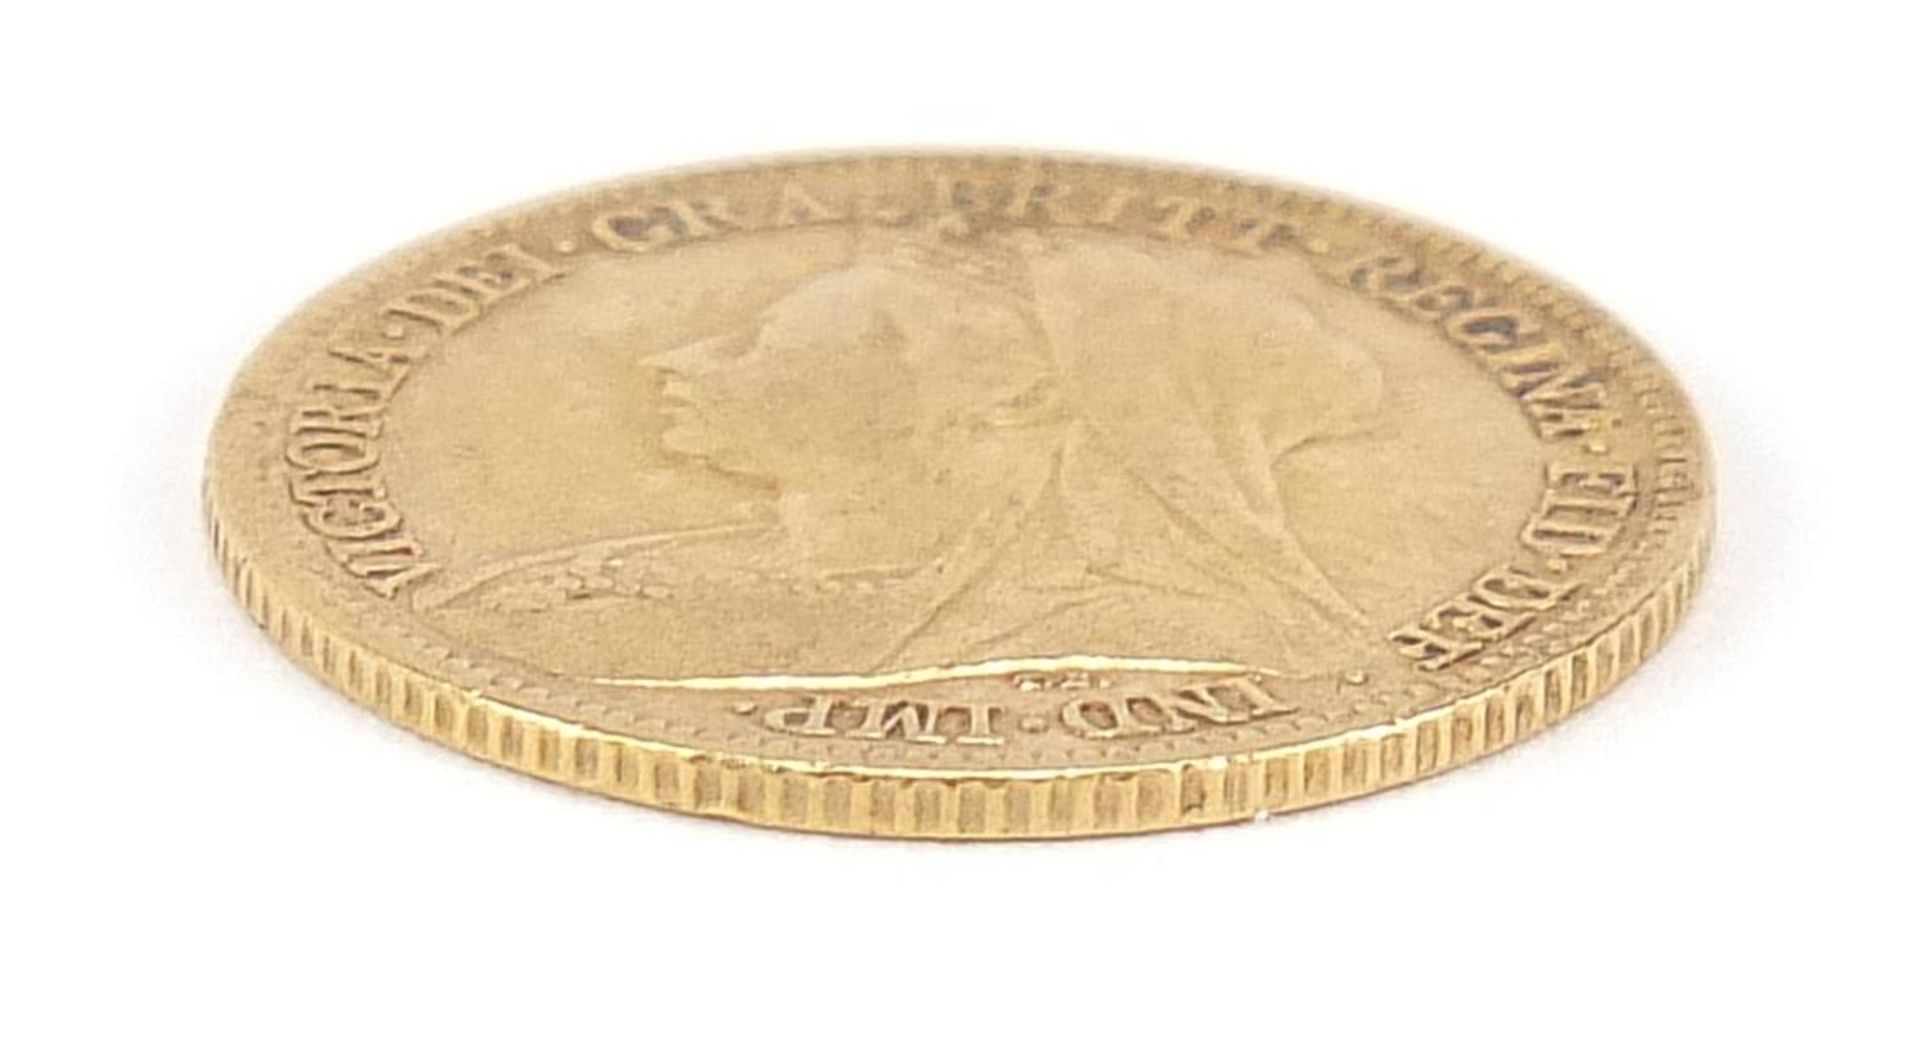 Queen Victoria 1900 gold half sovereign - this lot is sold without buyer's premium - Image 3 of 3